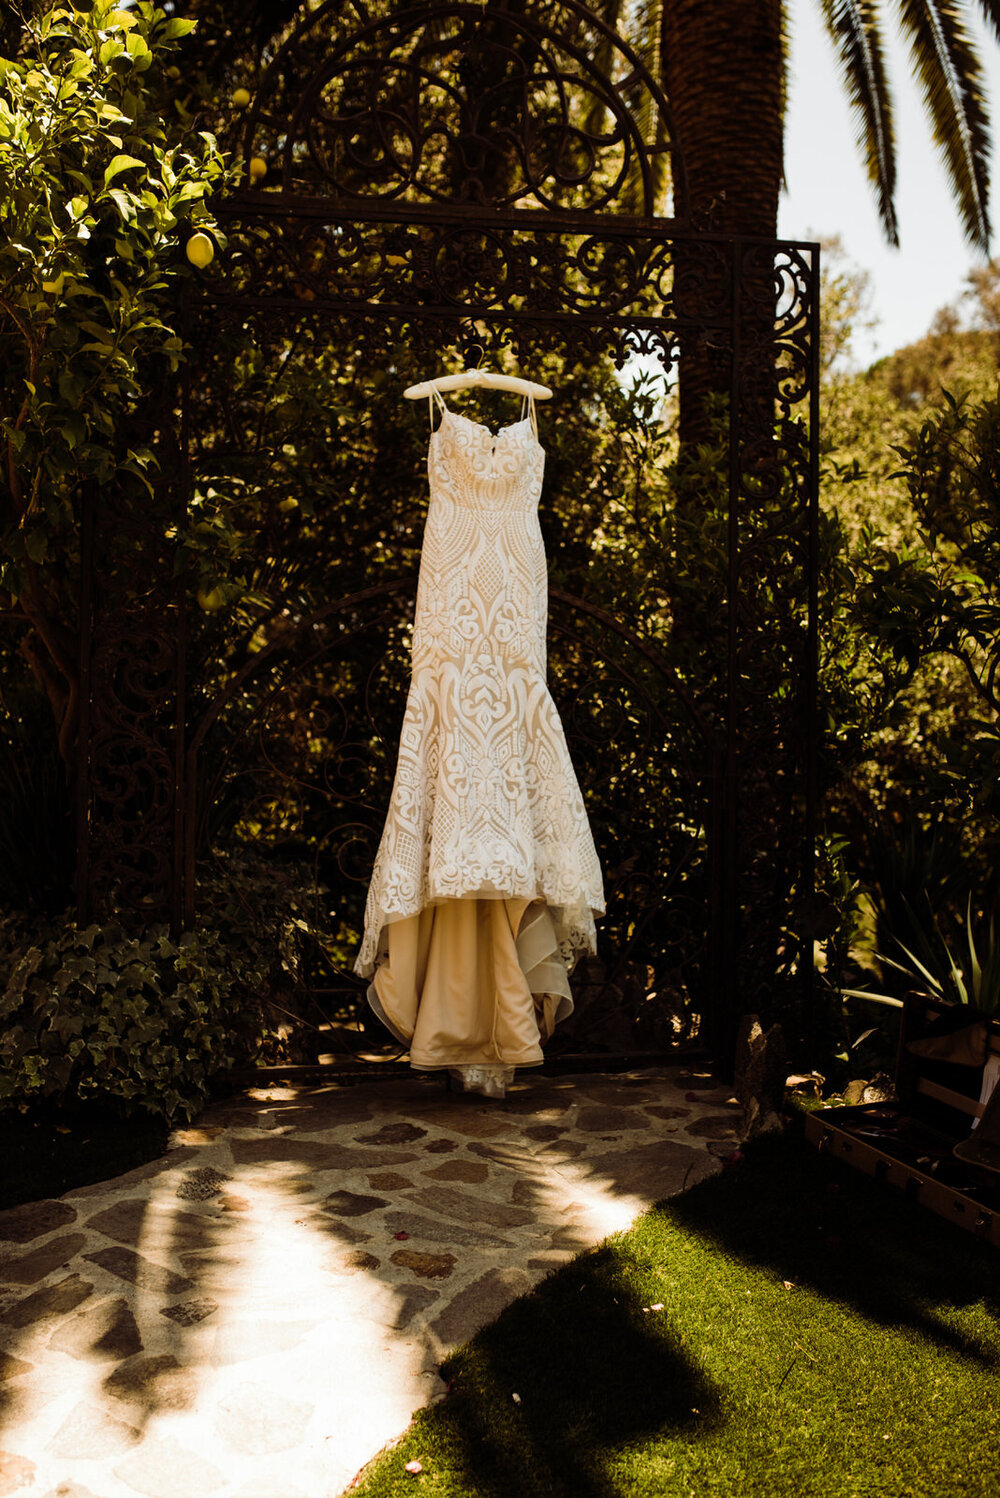 Blush by Hayley Paige Dress at Southern California Garden Wedding Venue - The Houdini Estate | Photos by Kept Record | www.keptrecord.com